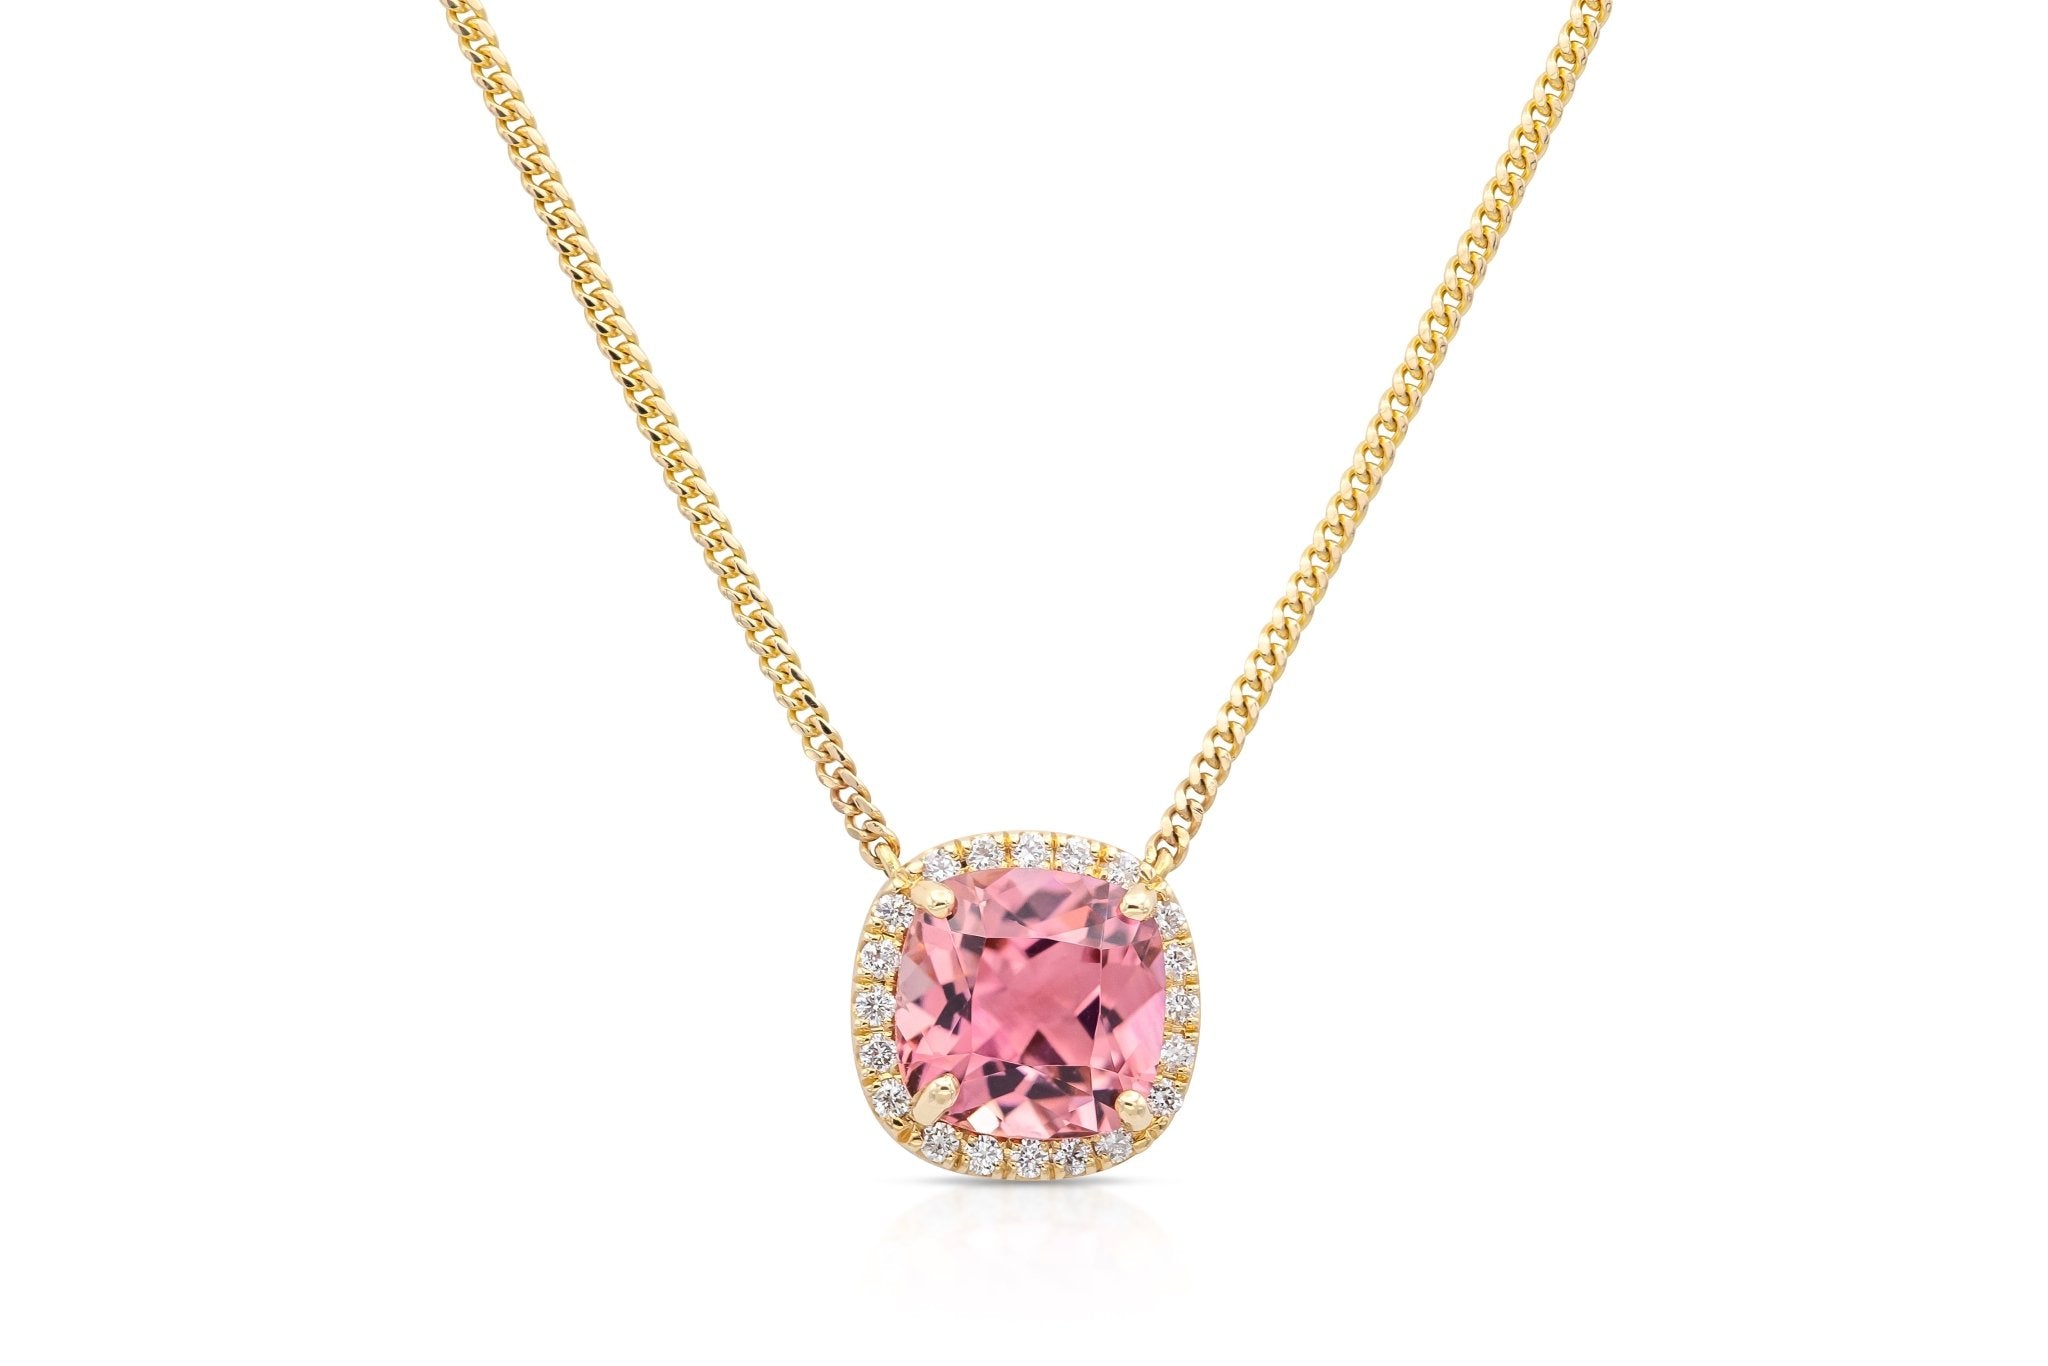 Pink Topaz Necklace - Kelly Wade Jewelers Store